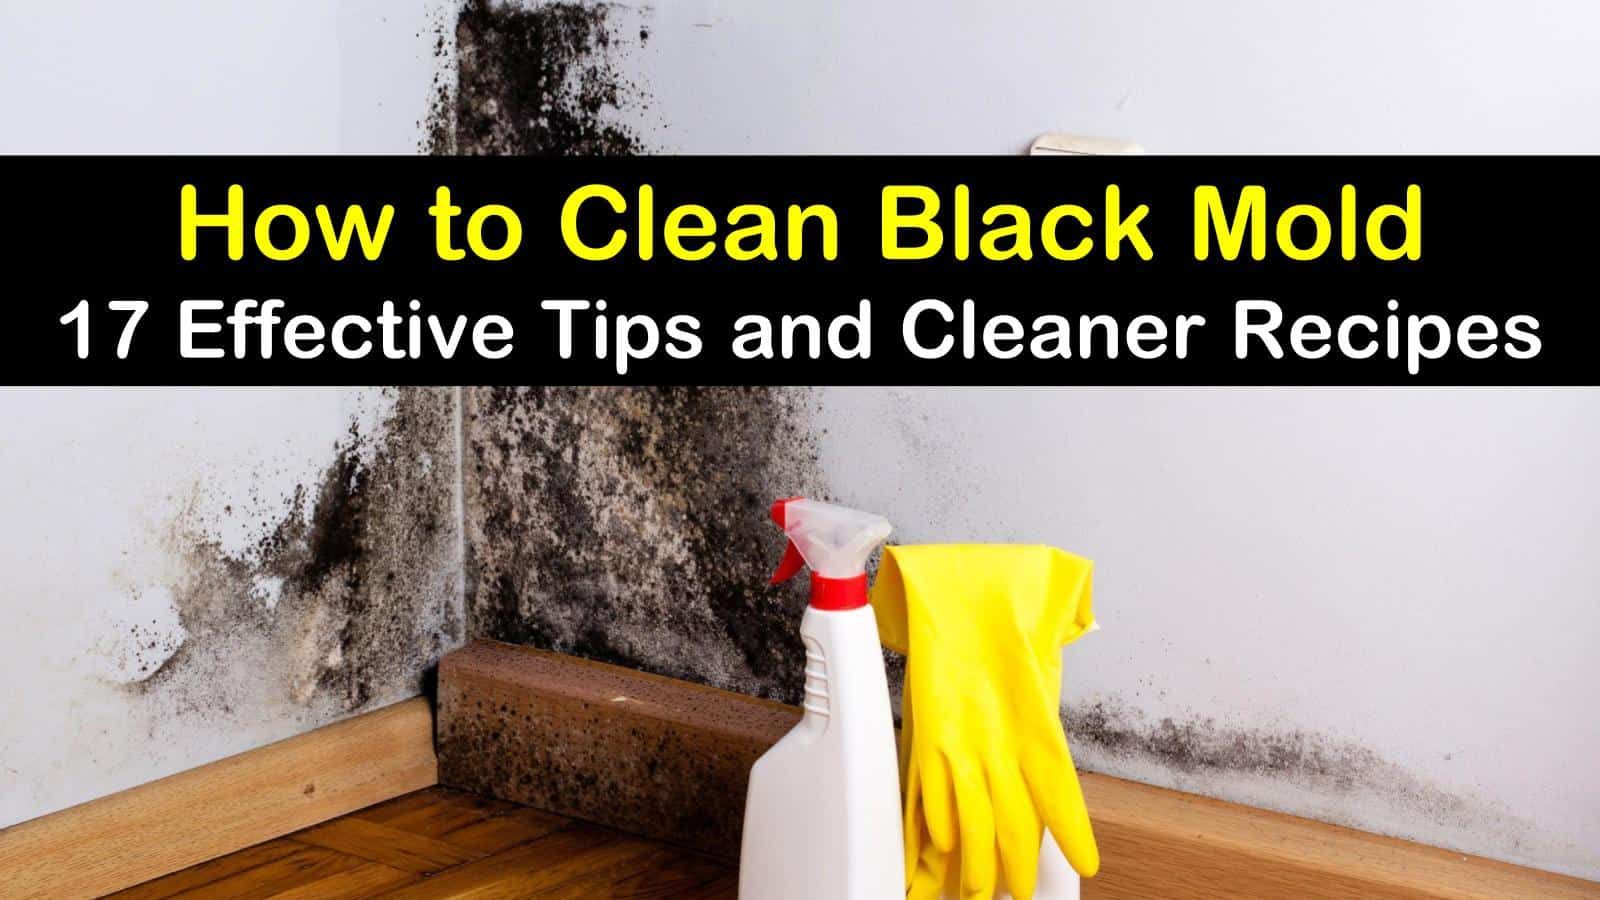 17 Effective Ways to Clean Black Mold